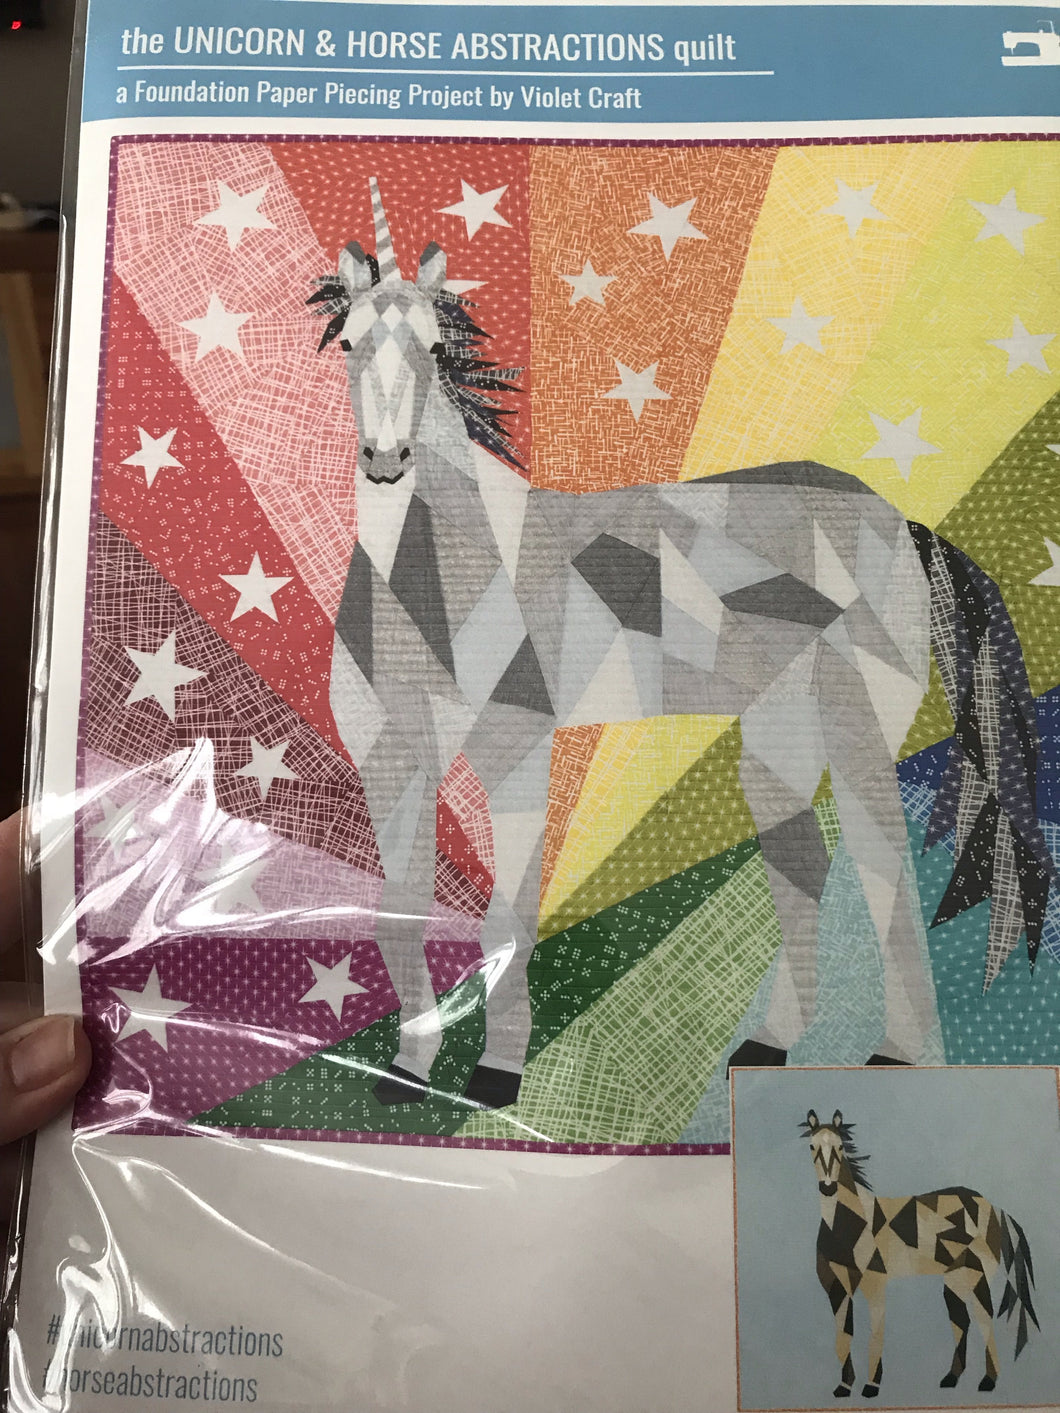 The Unicorn & Horse Abstraction quilt byViolet Craft